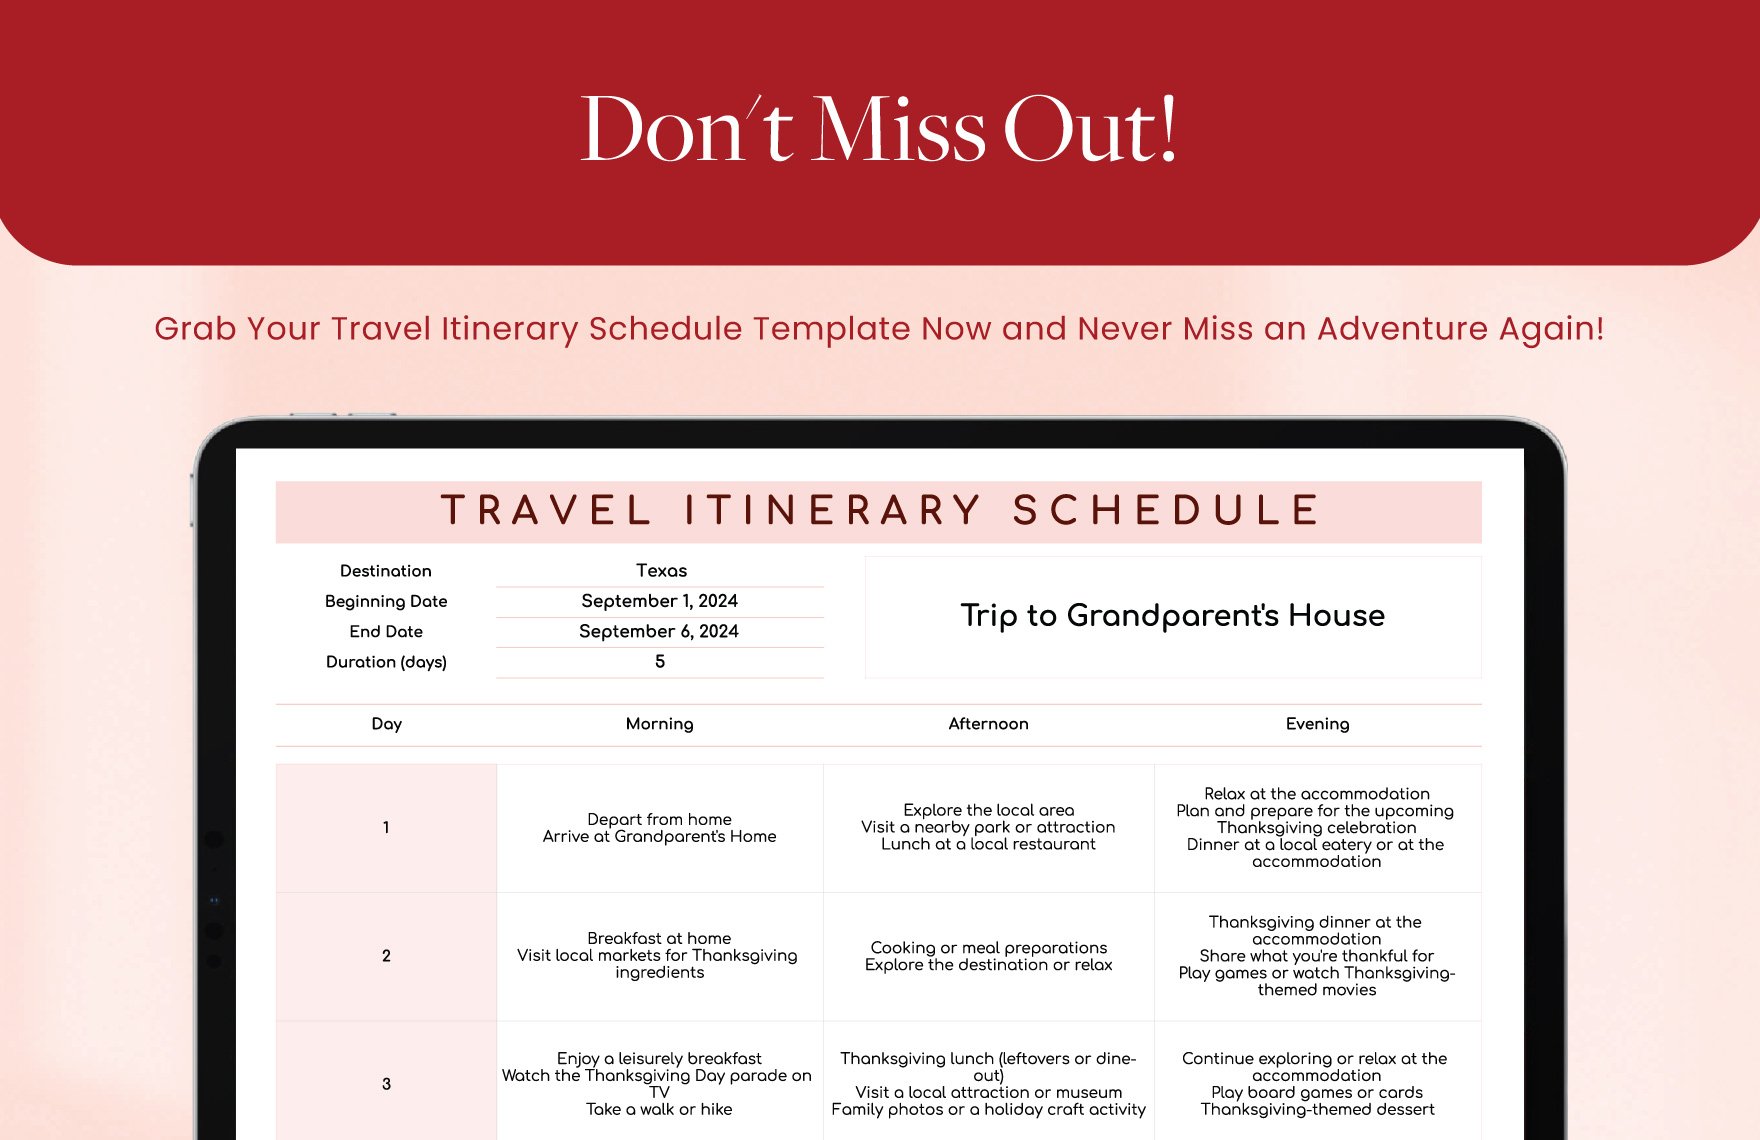 Travel Itinerary Schedule Template